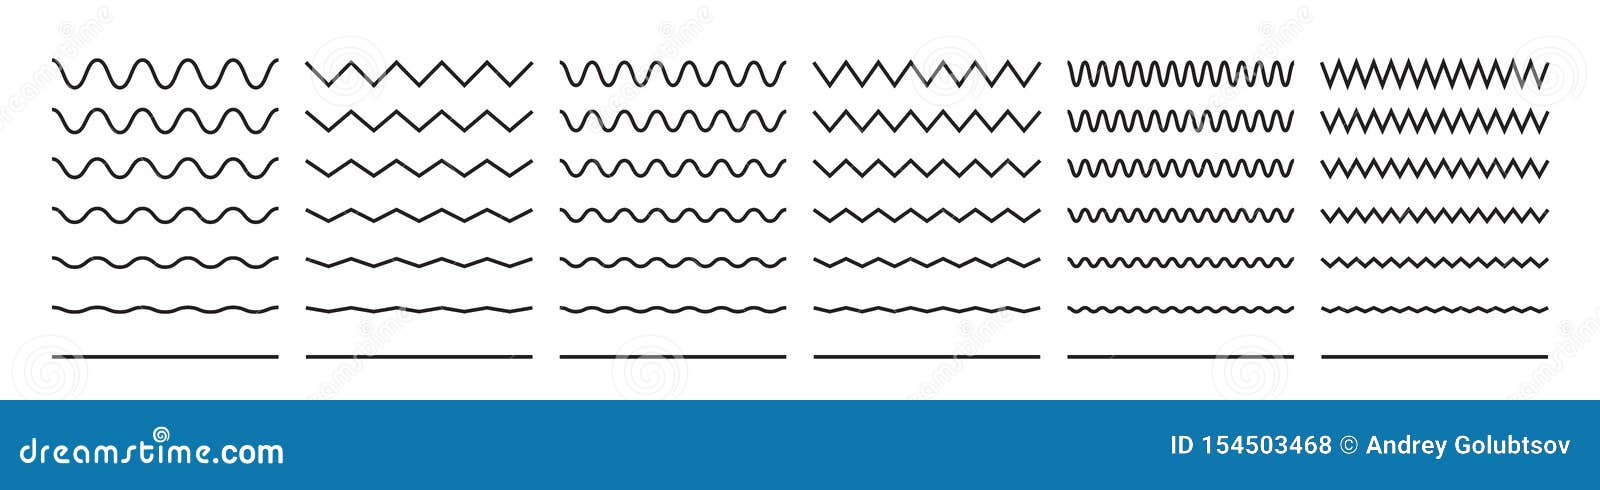 zigzag wave line patterns, smooth end squiggly horizontal  lines, curvy underlines